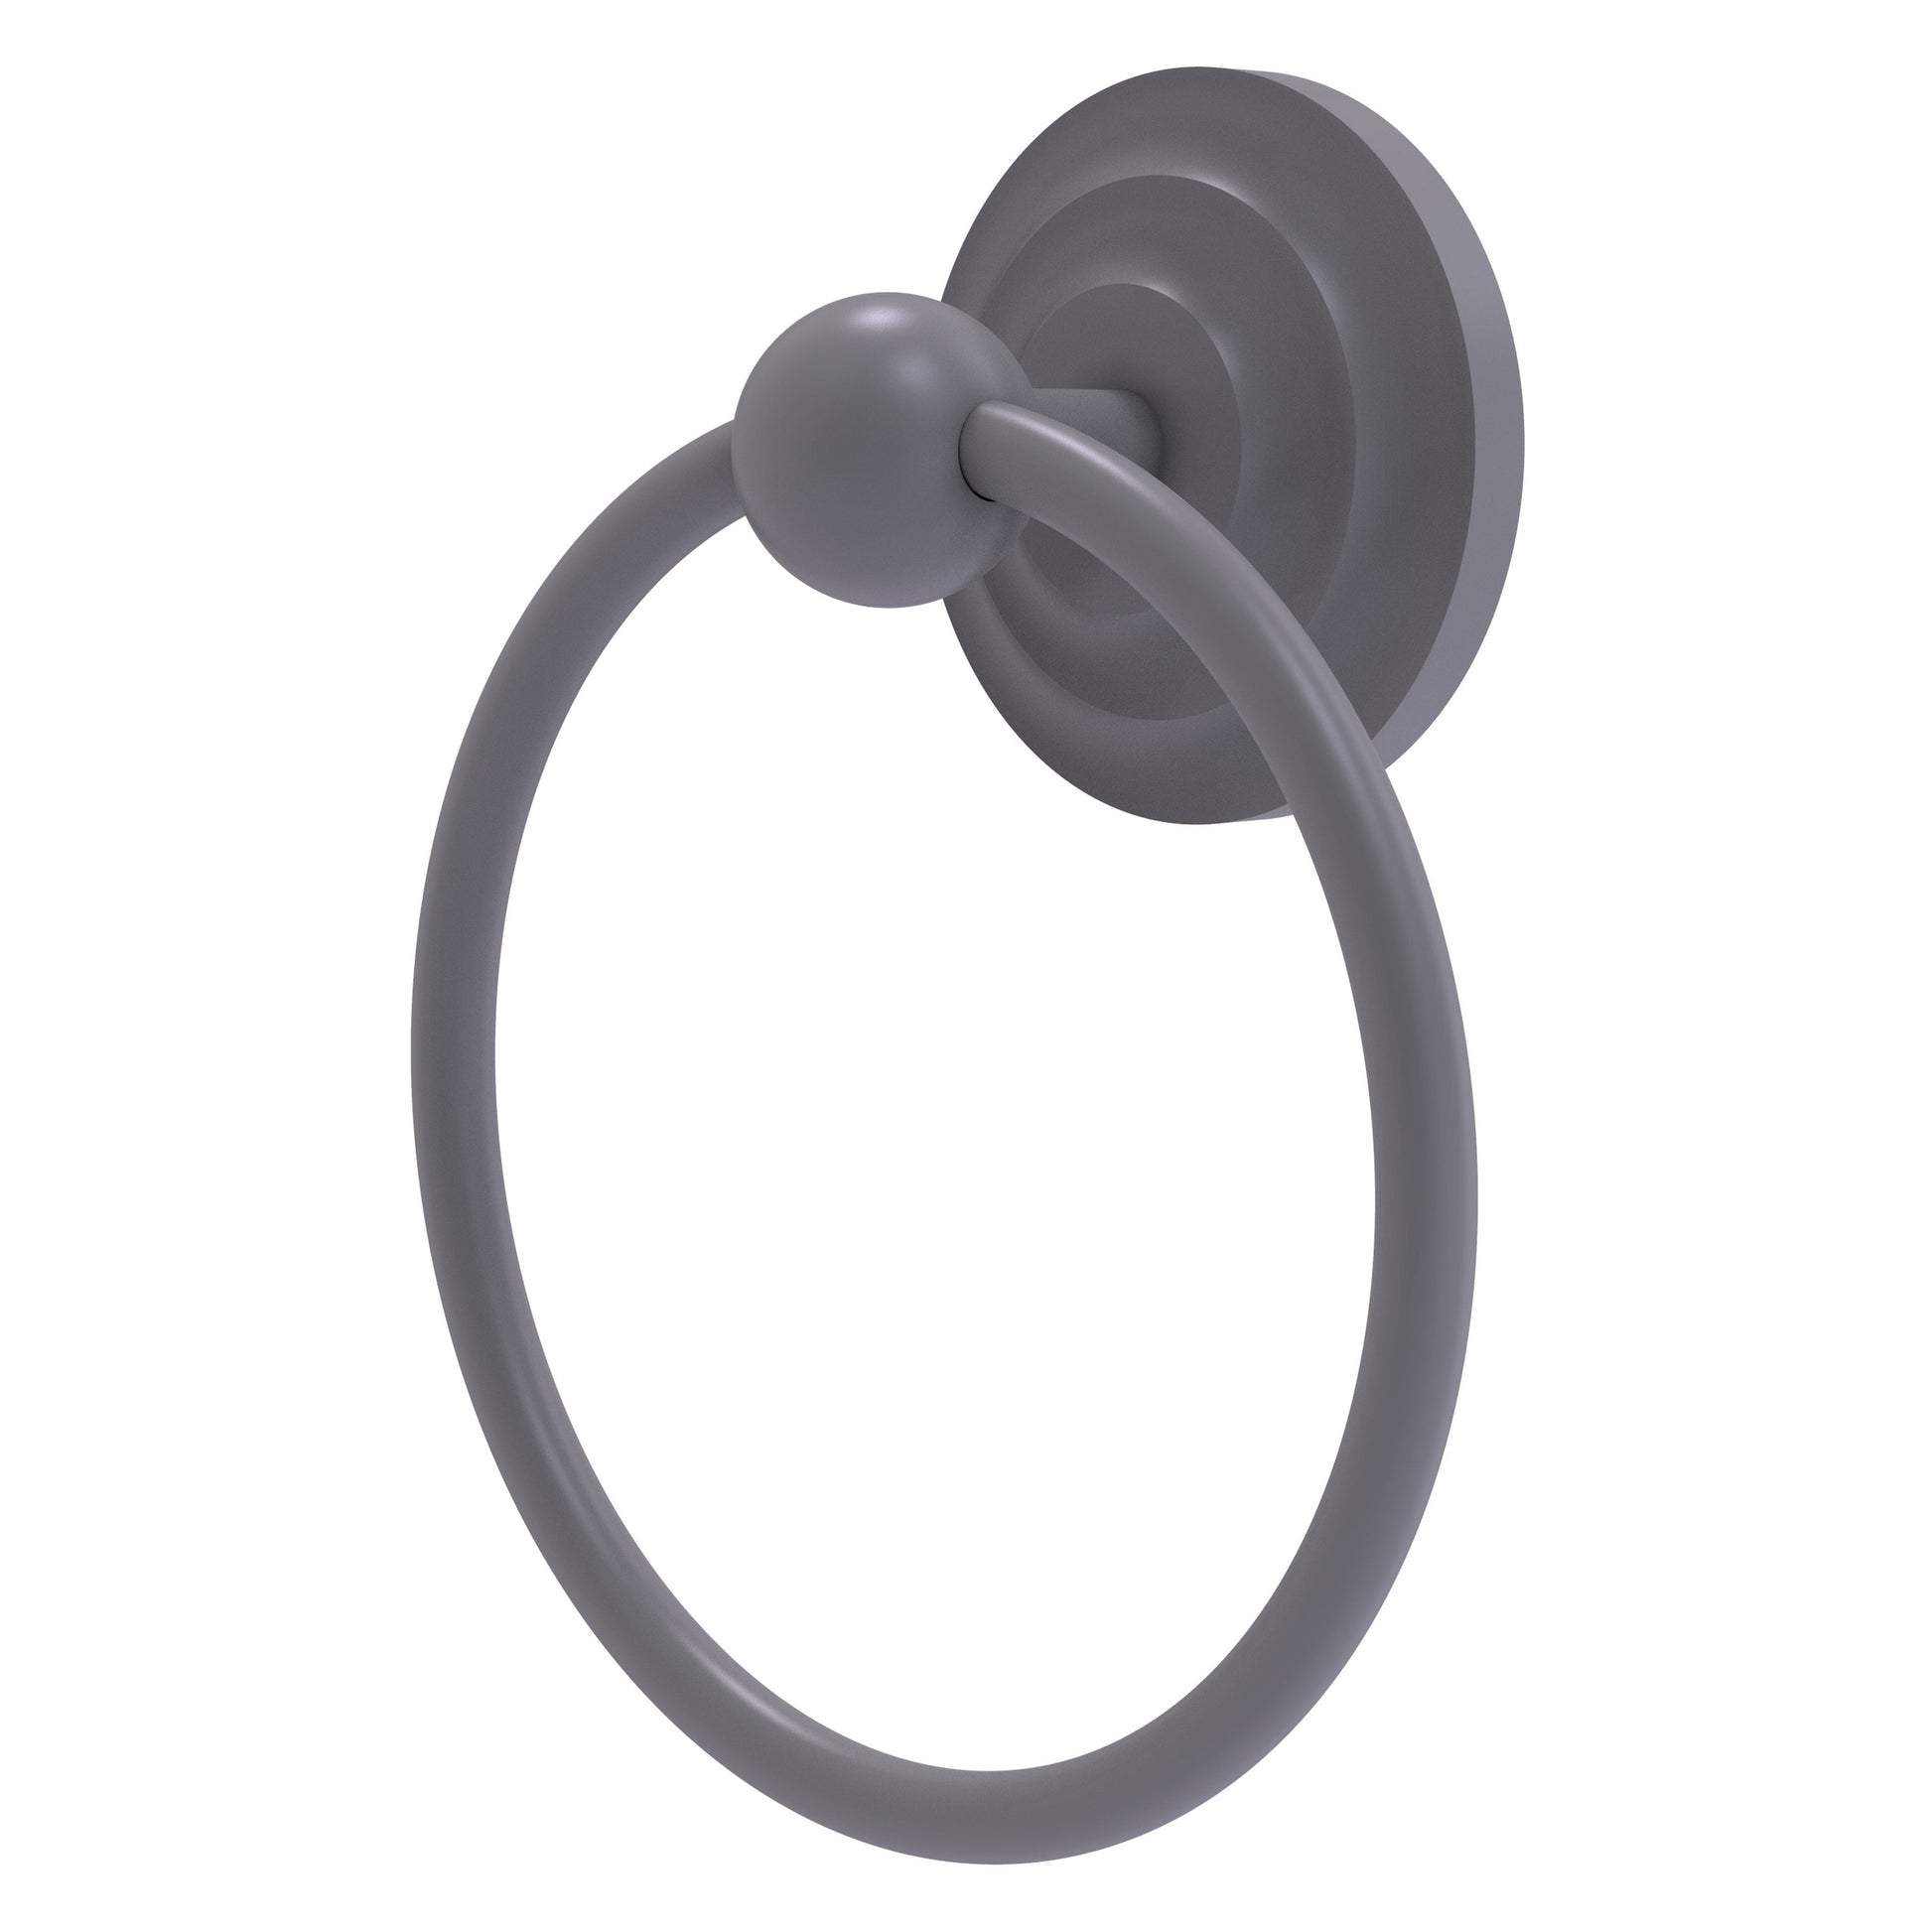 Allied Brass Que New 6" x 6" Matte Gray Solid Brass Towel Ring